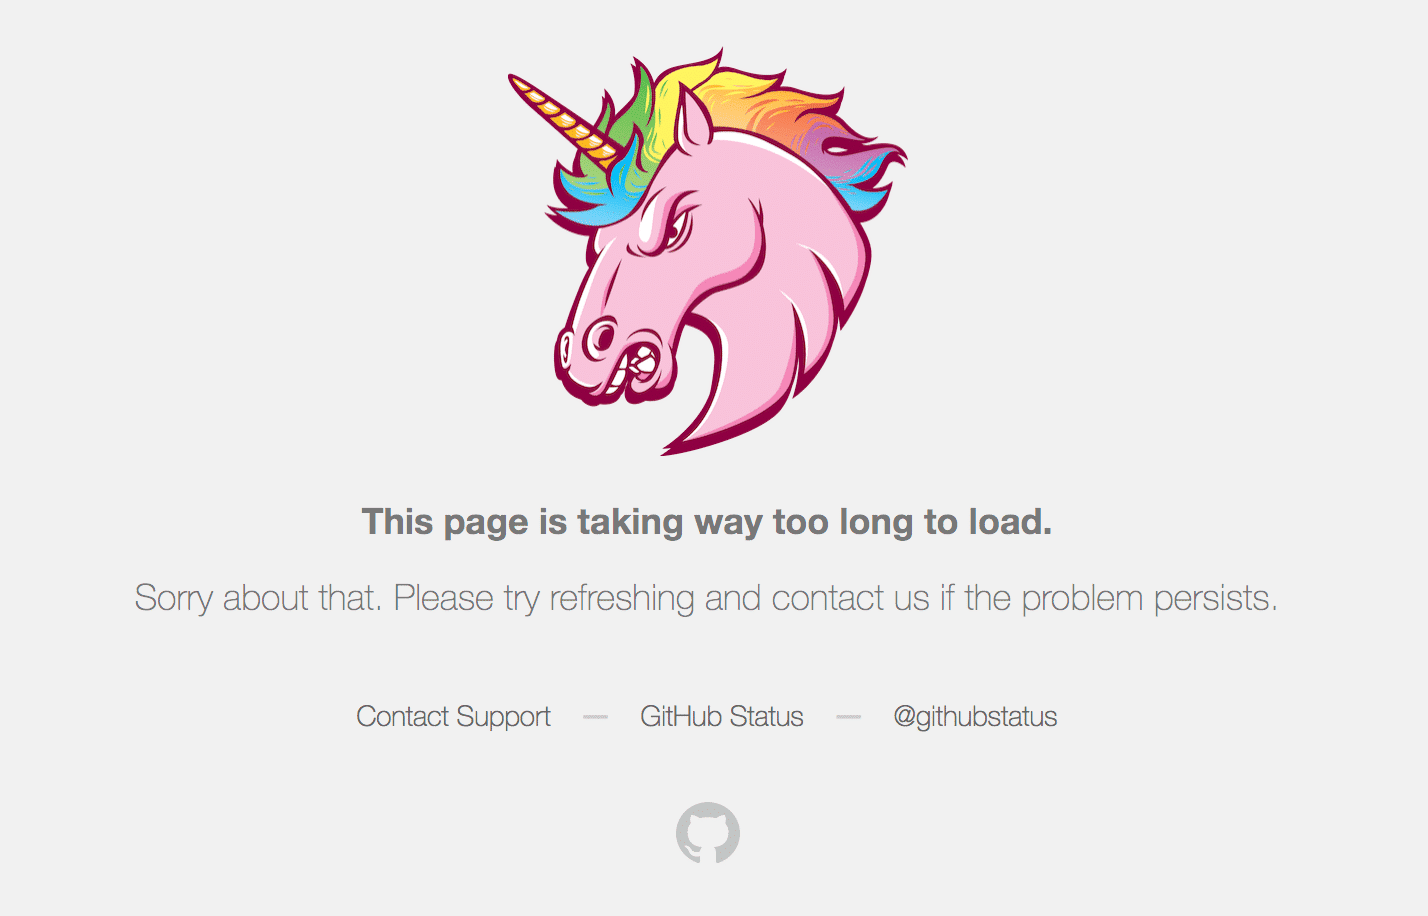 GitHub’s customized HTTP 504 error page